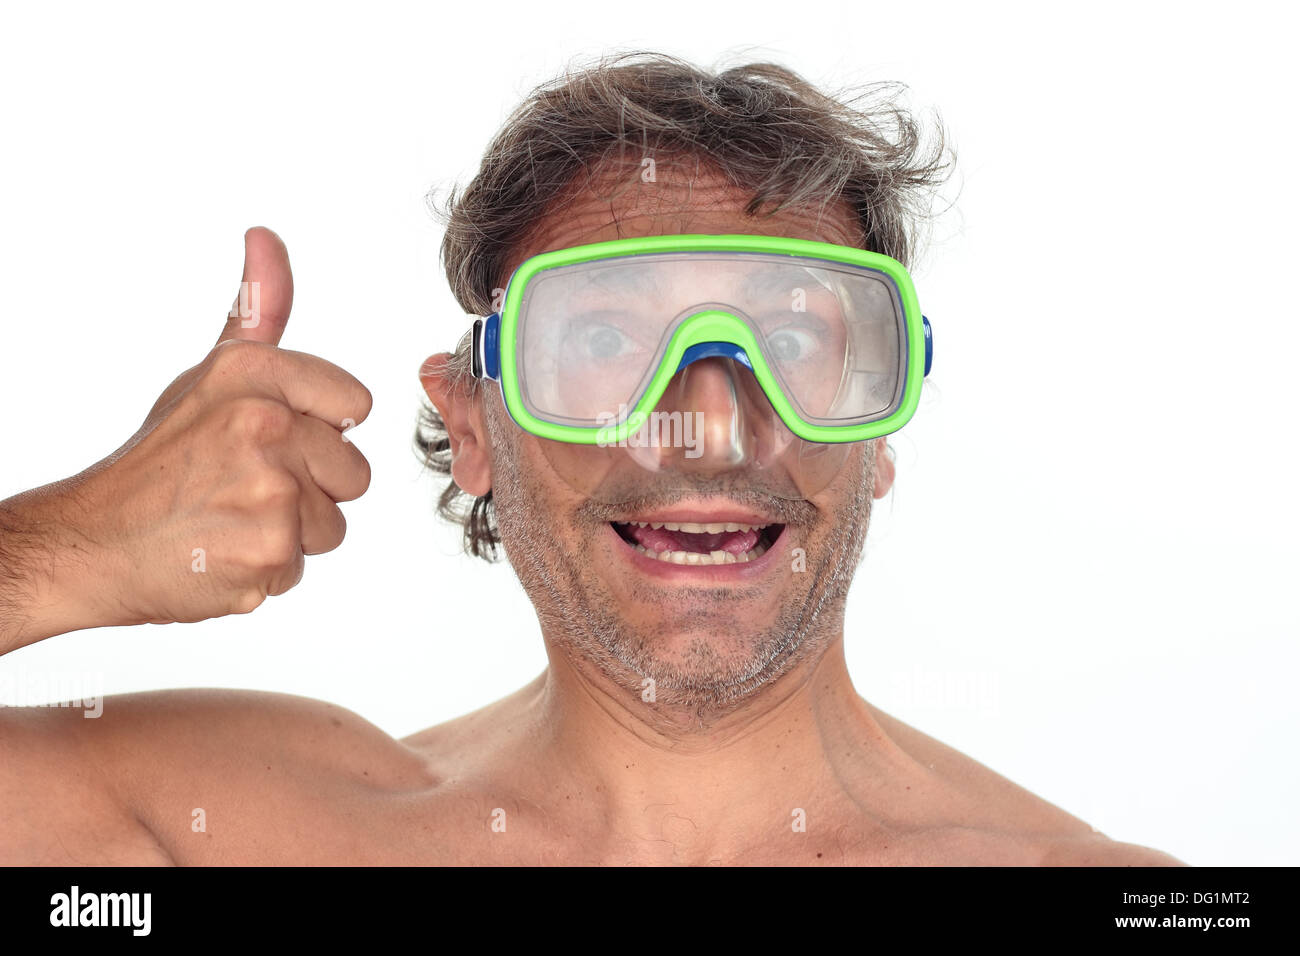 man in goggles doing hand sign 'go up' Stock Photo